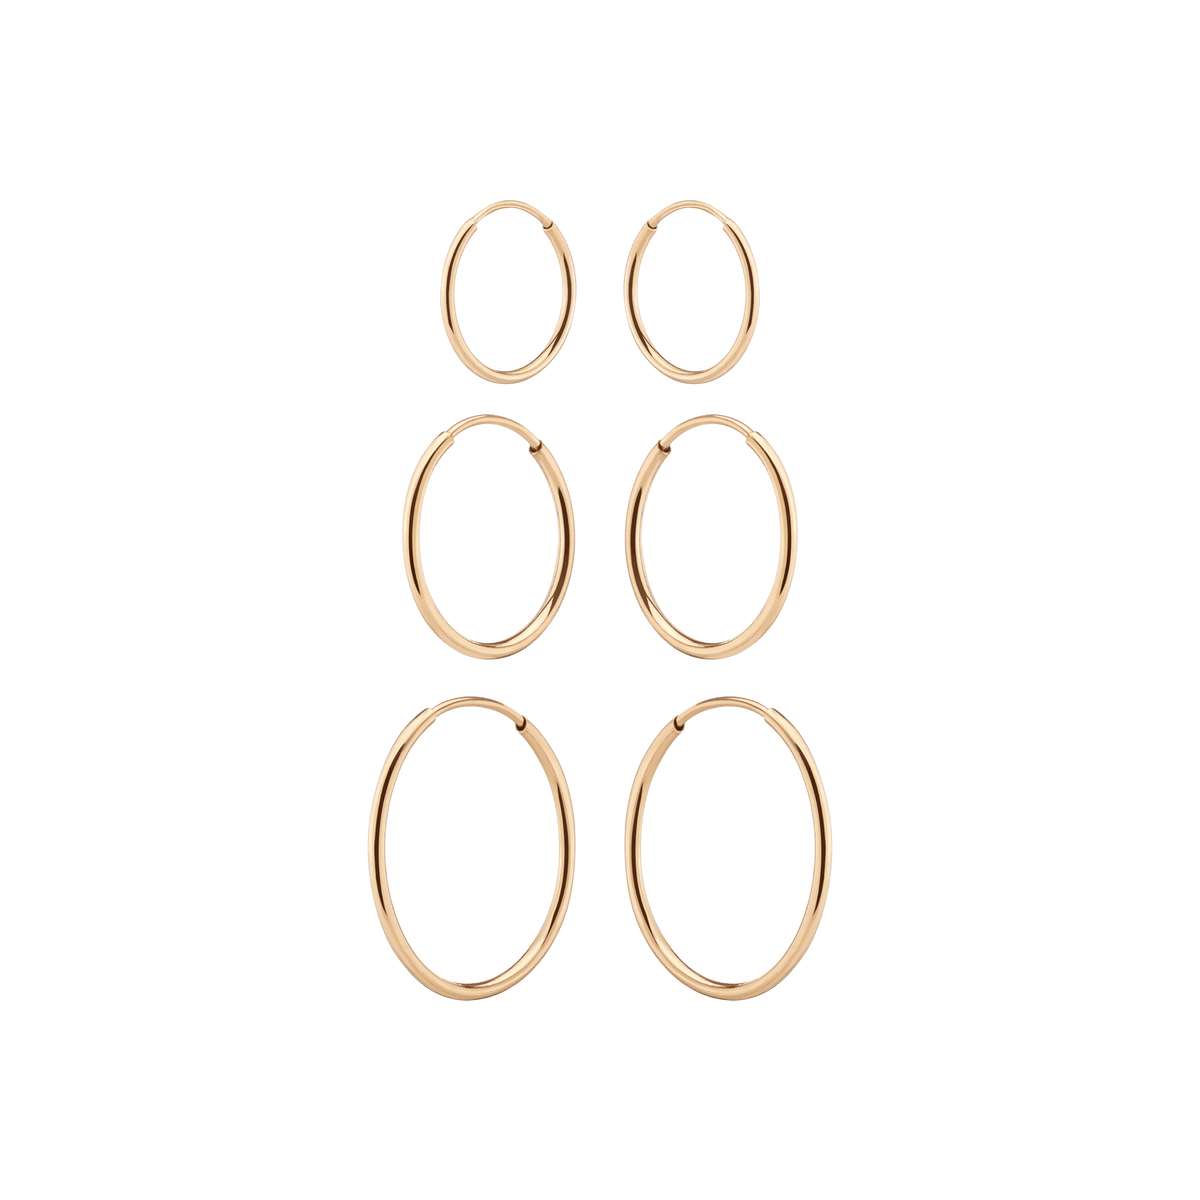 New hoops for the summer? Yes please! 🙌 . . . #goldhoops #hoopearrings  #goldhoopearrings #summerjewelry #waterproofjewelry #smallhoops…